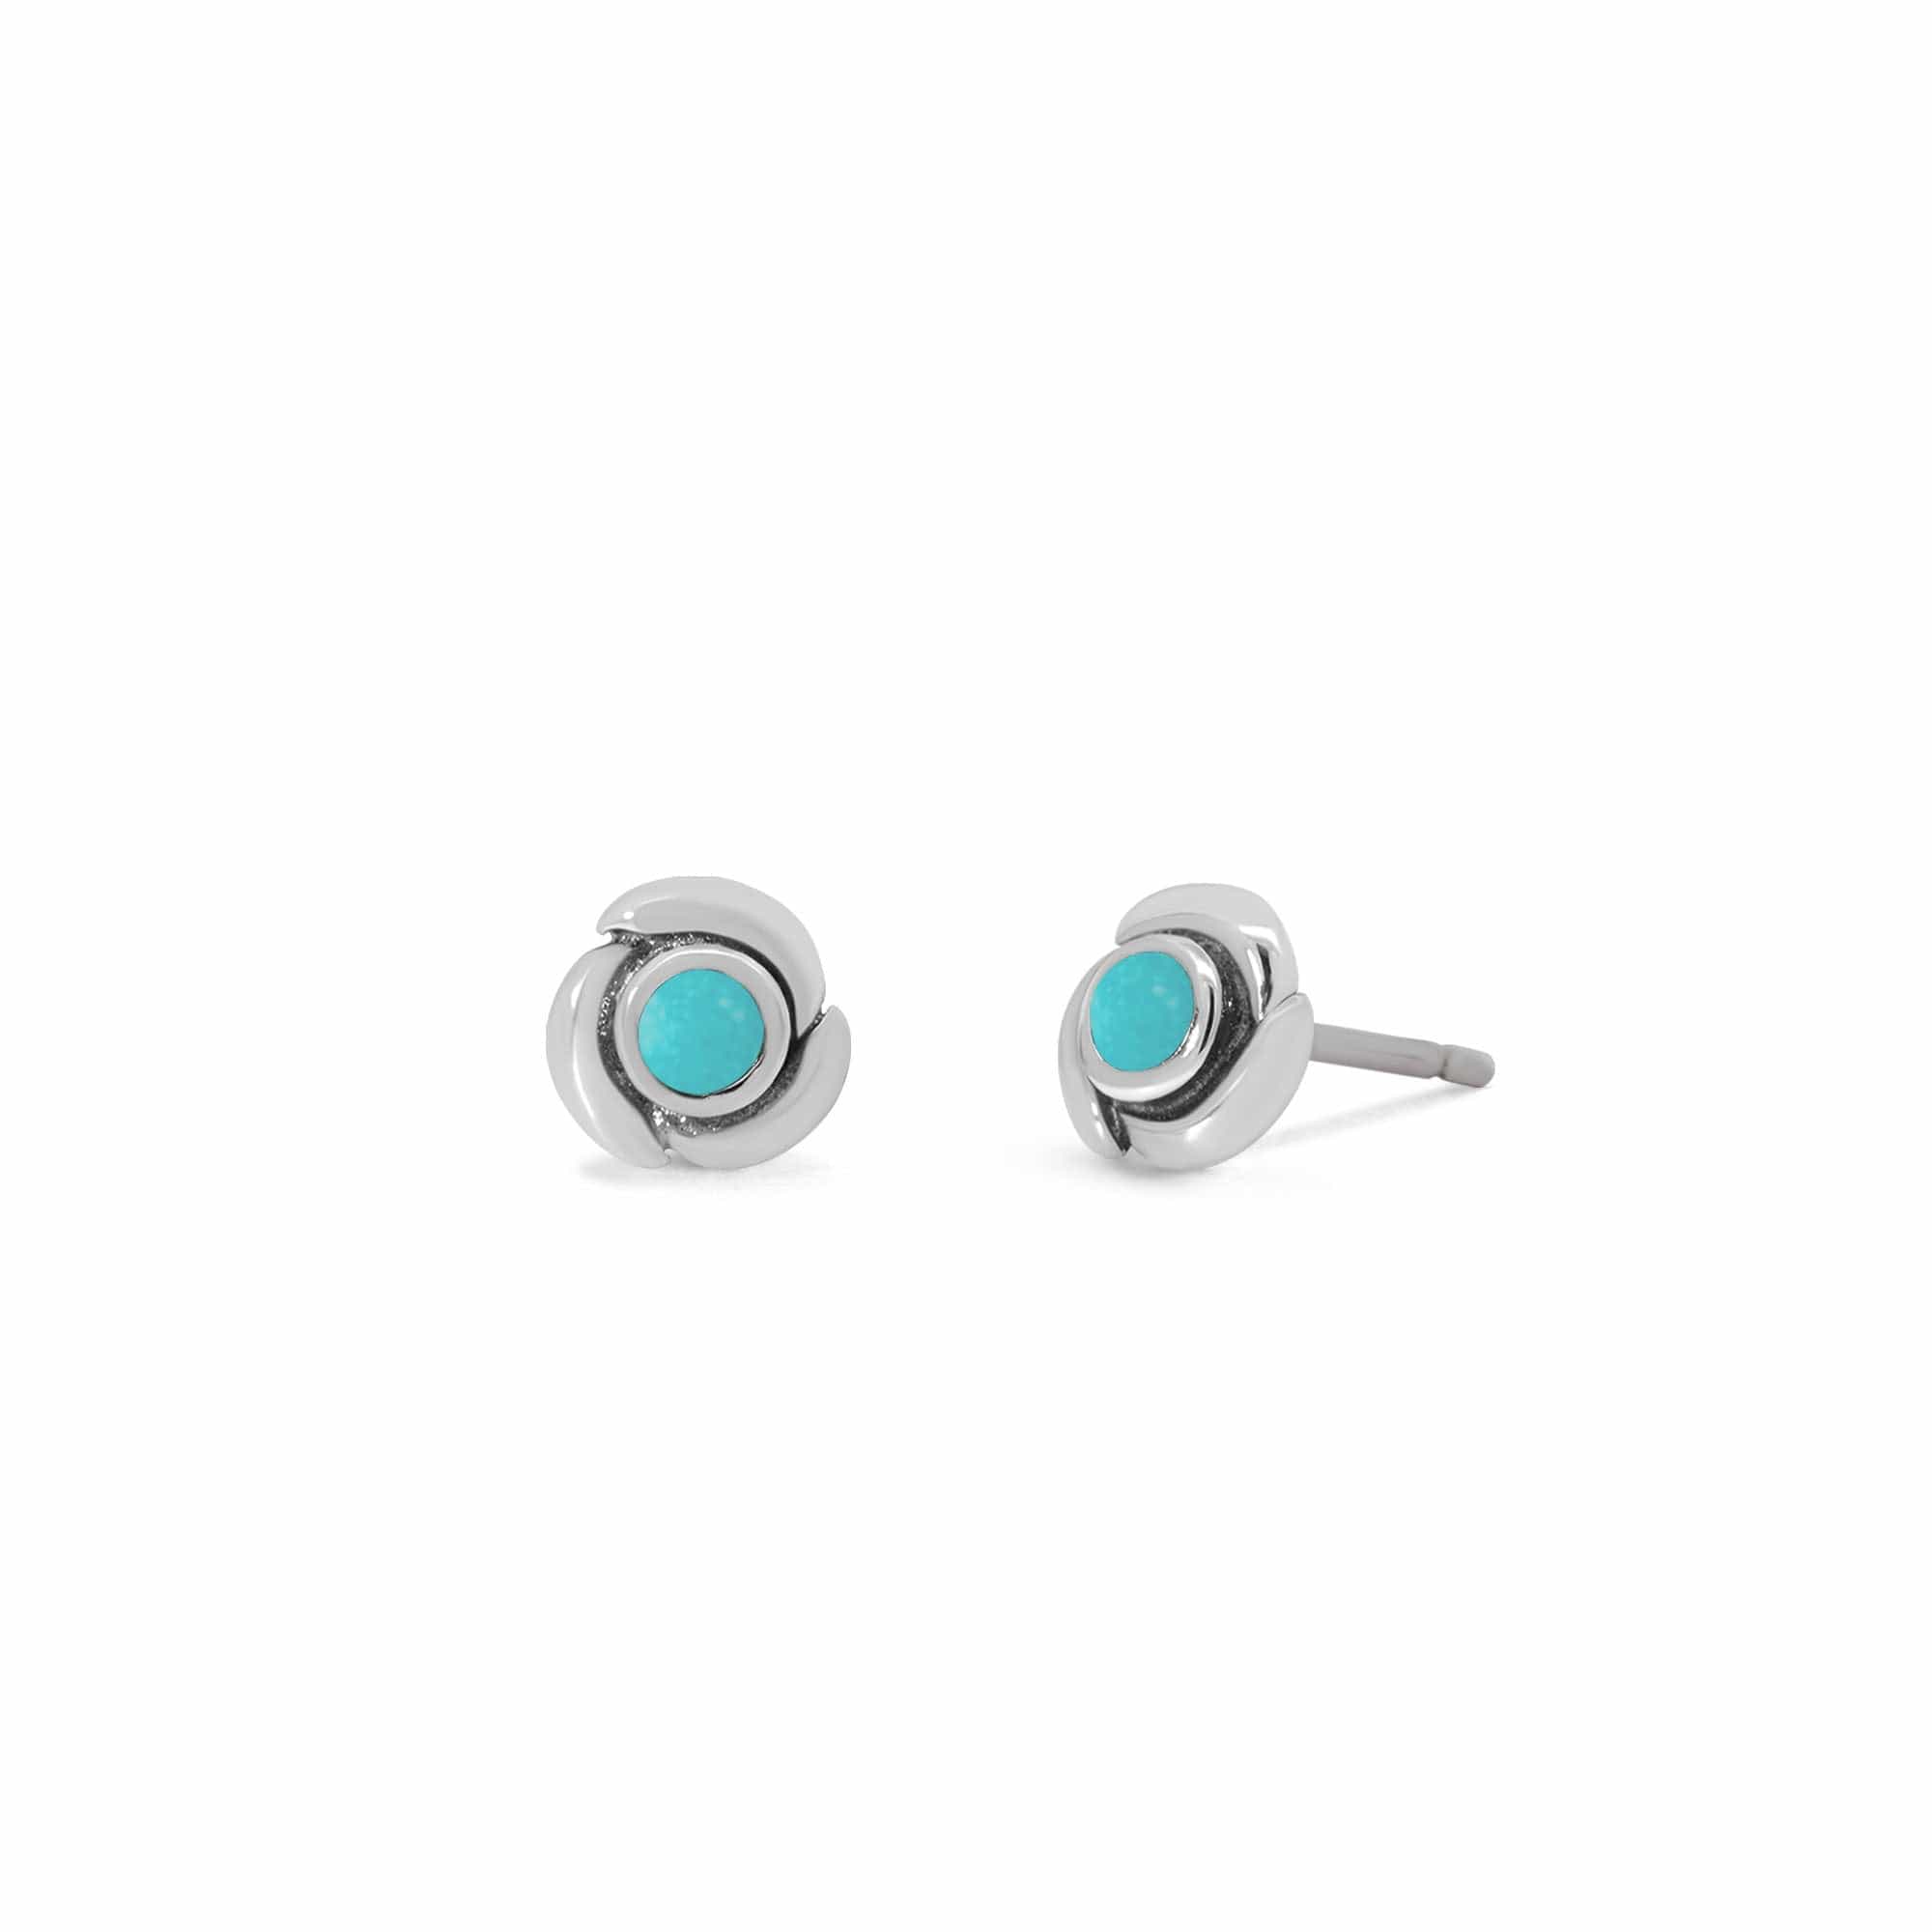 Boma Jewelry Earrings Turquoise Spiral Circle Stud Earrings with Stone